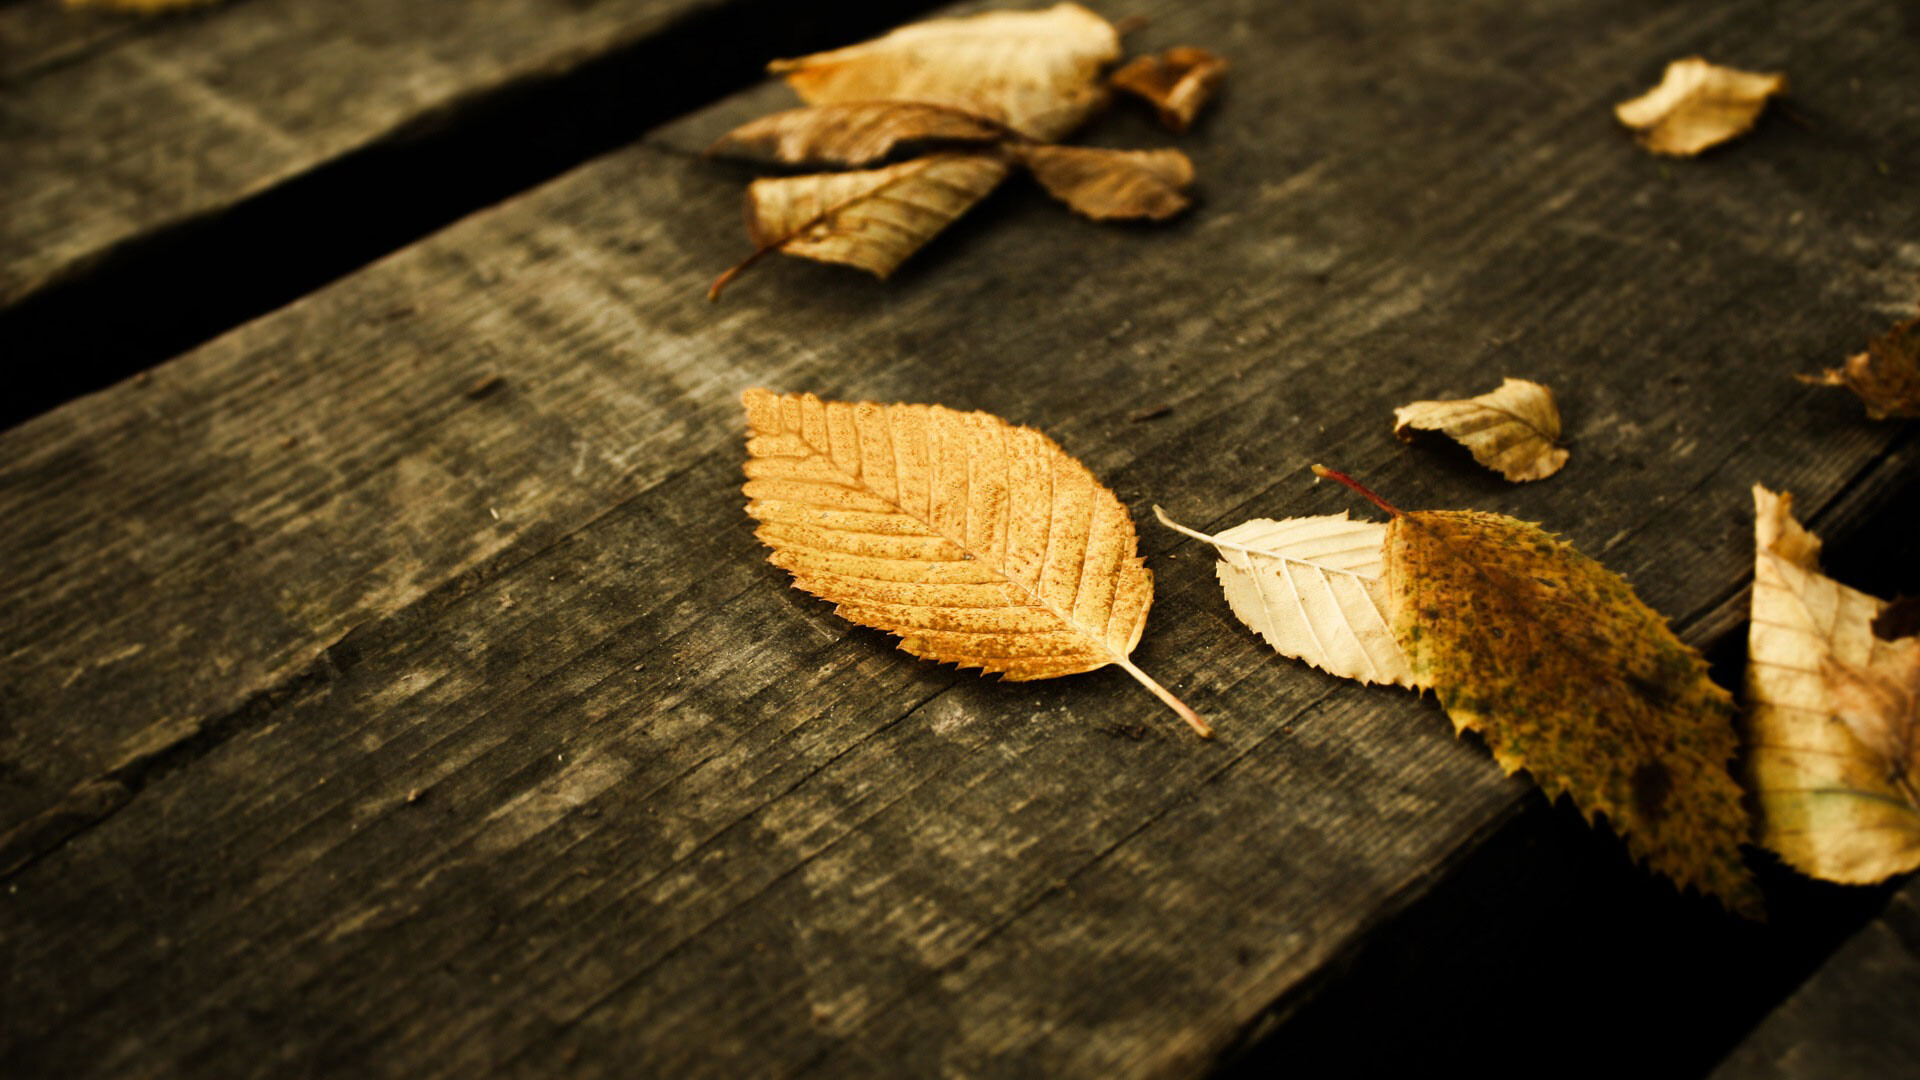 Gold Leaf: Elm leaves in autumn, Trees shedding their leaves, The fall foliage of the American elm. 1920x1080 Full HD Background.